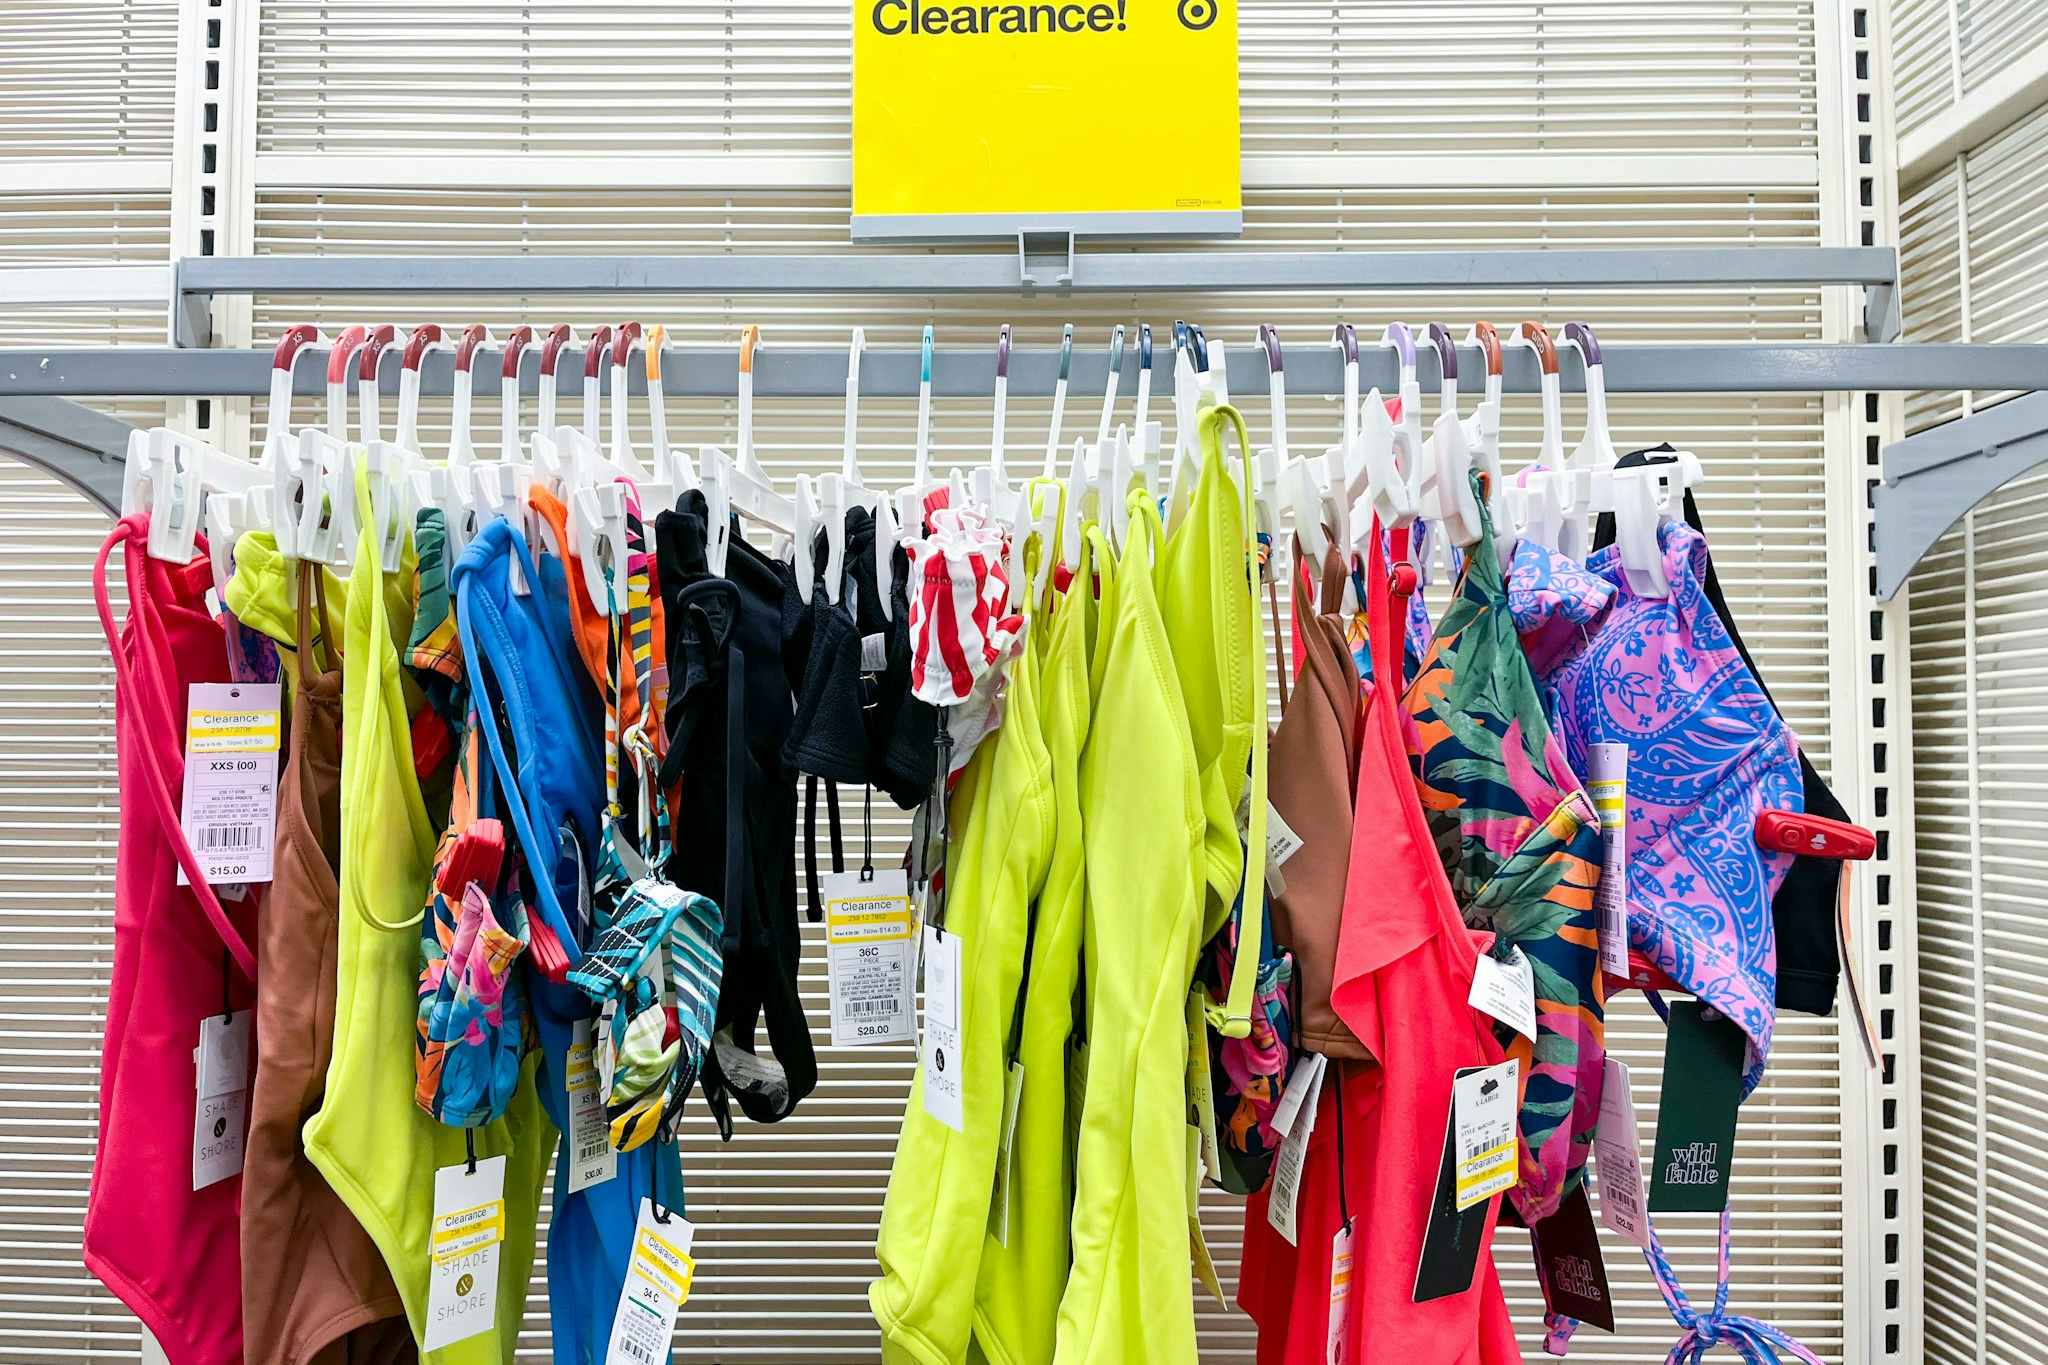 Women's Swimsuit Clearance, Up to 70% Off — As Low as $4.27 at Target